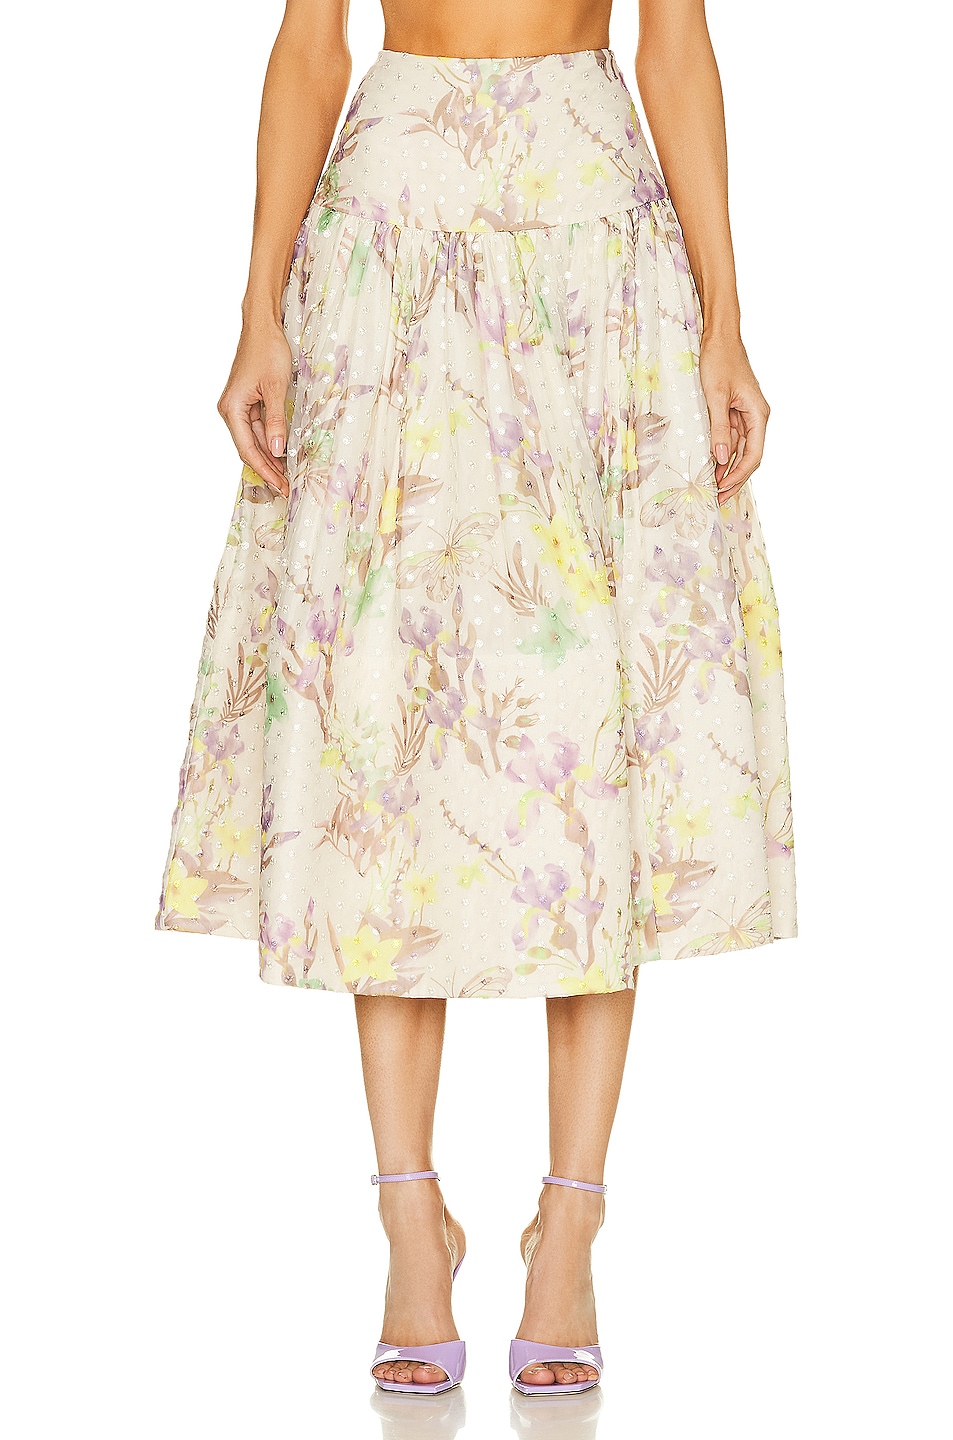 Image 1 of Alexis Pheobe Skirt in Floral Embroidered